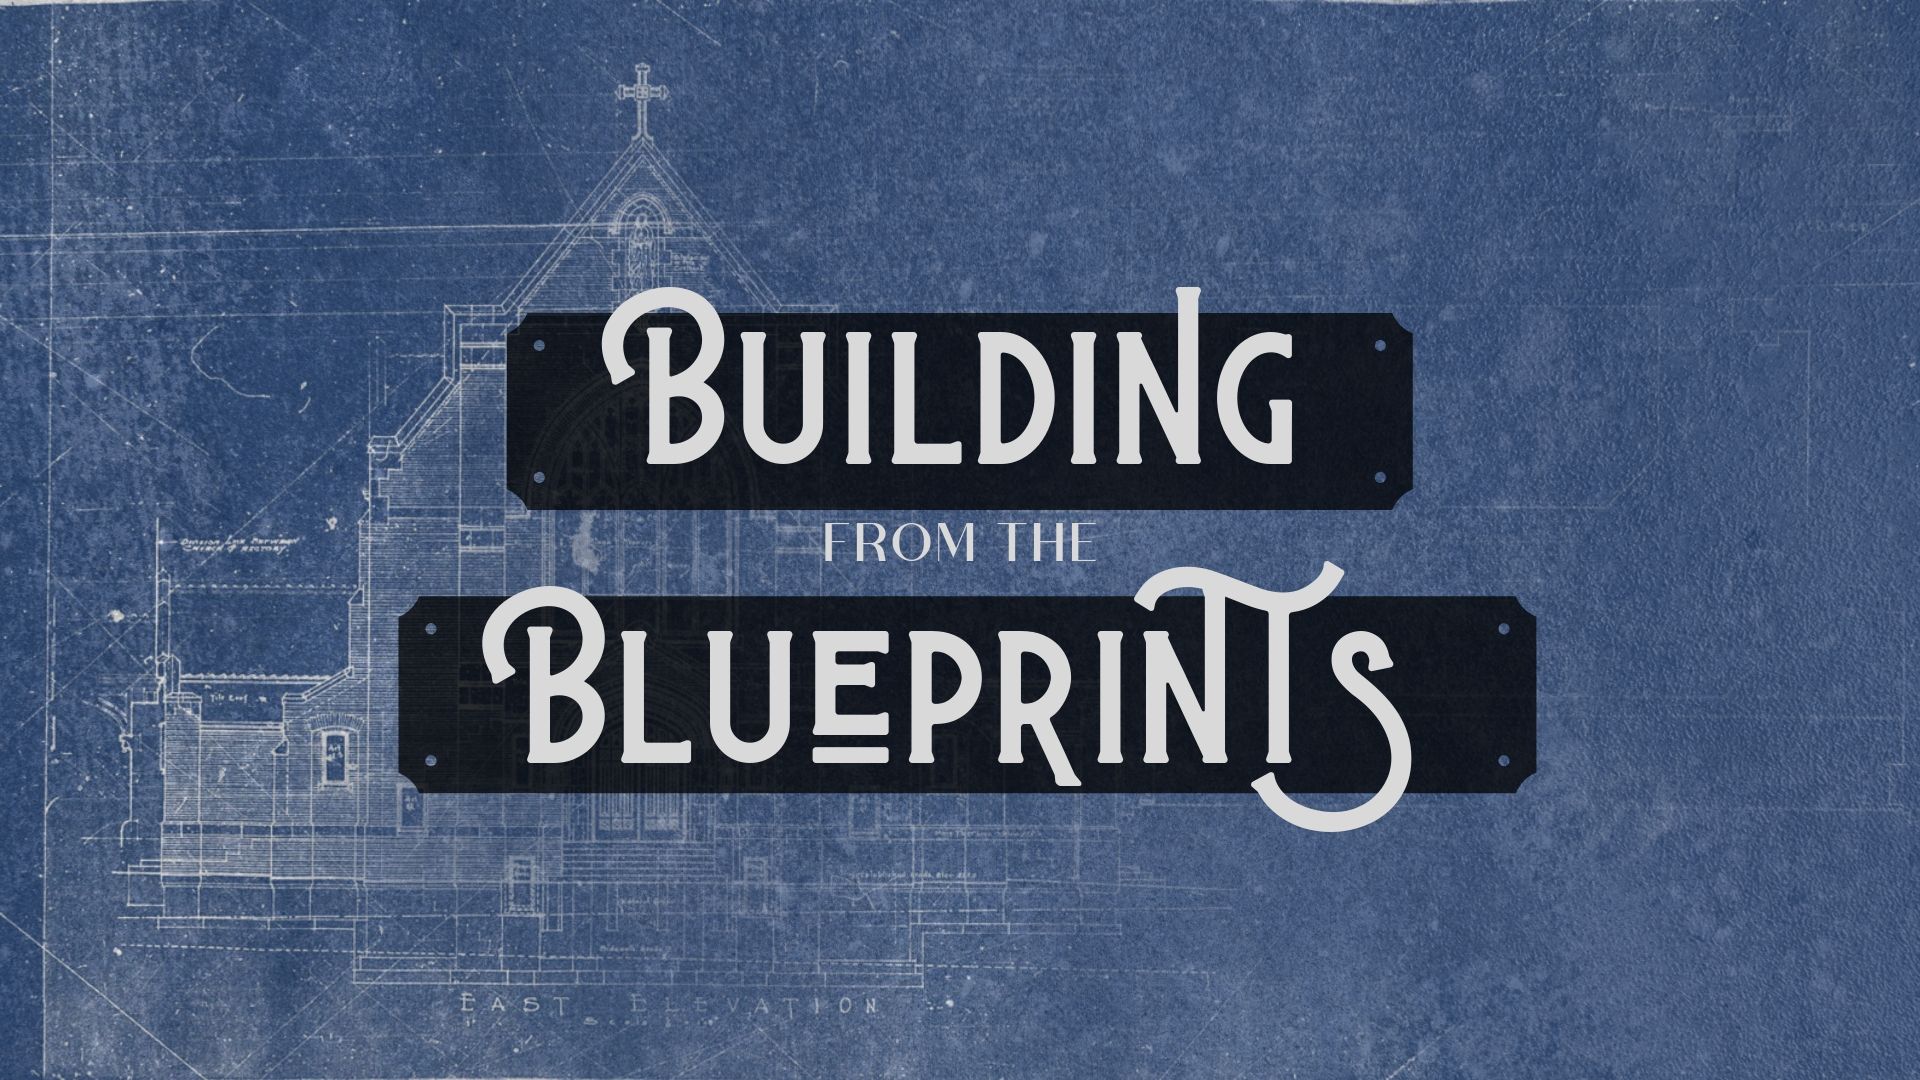 Building from the Blueprints: Part 1